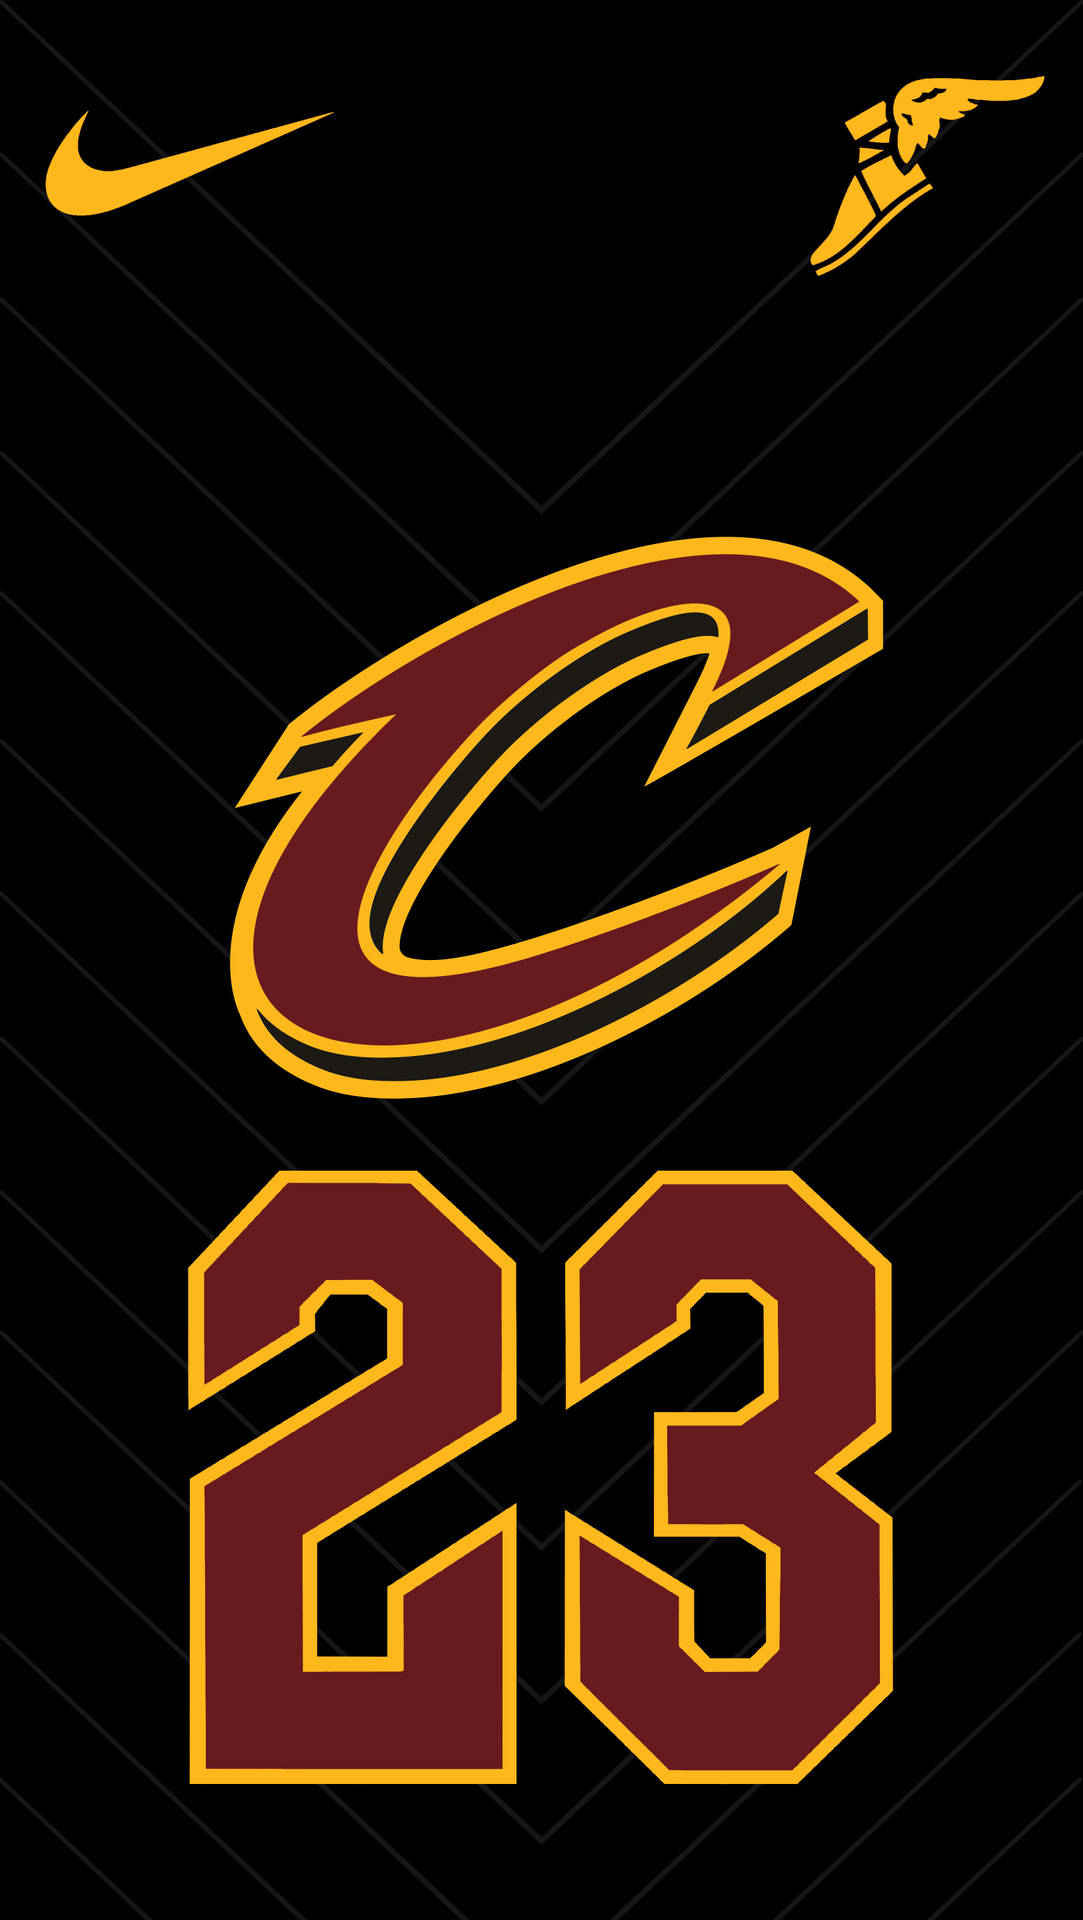 Lebron James in his Cleveland Cavaliers Jersey Wallpaper